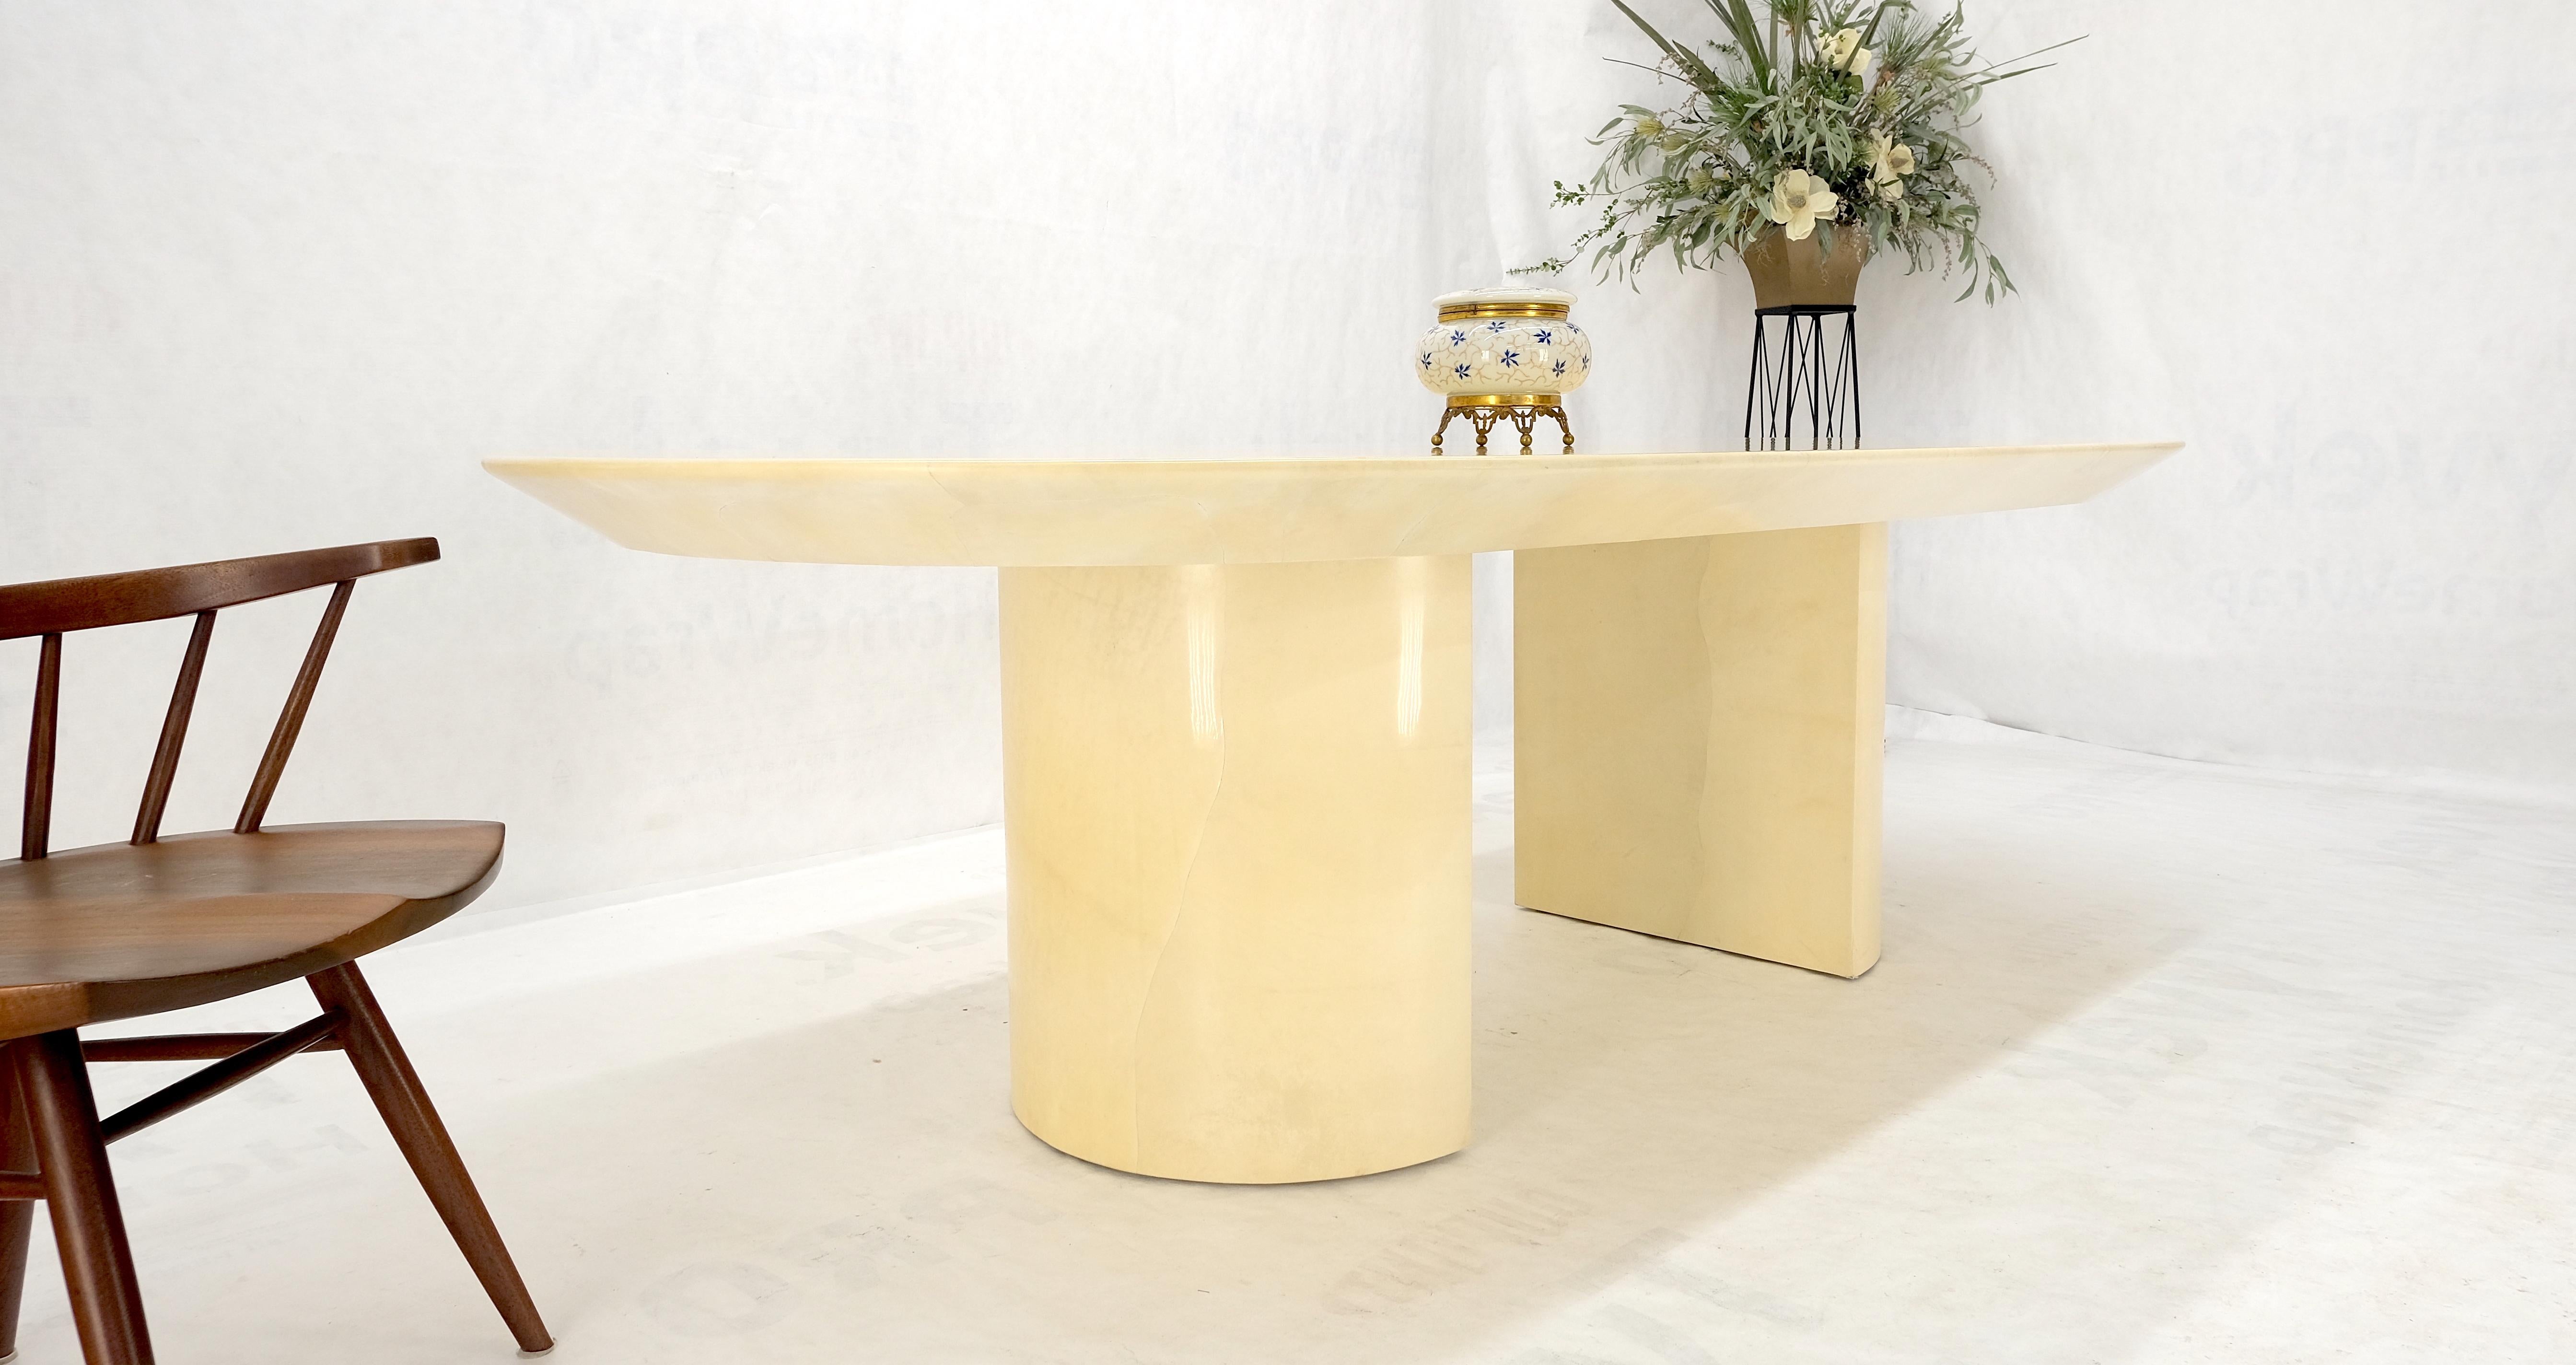 Large Oval Racetrack Knife Edge Lacquered Parchment Goat Skin Dining Table MINT  For Sale 4